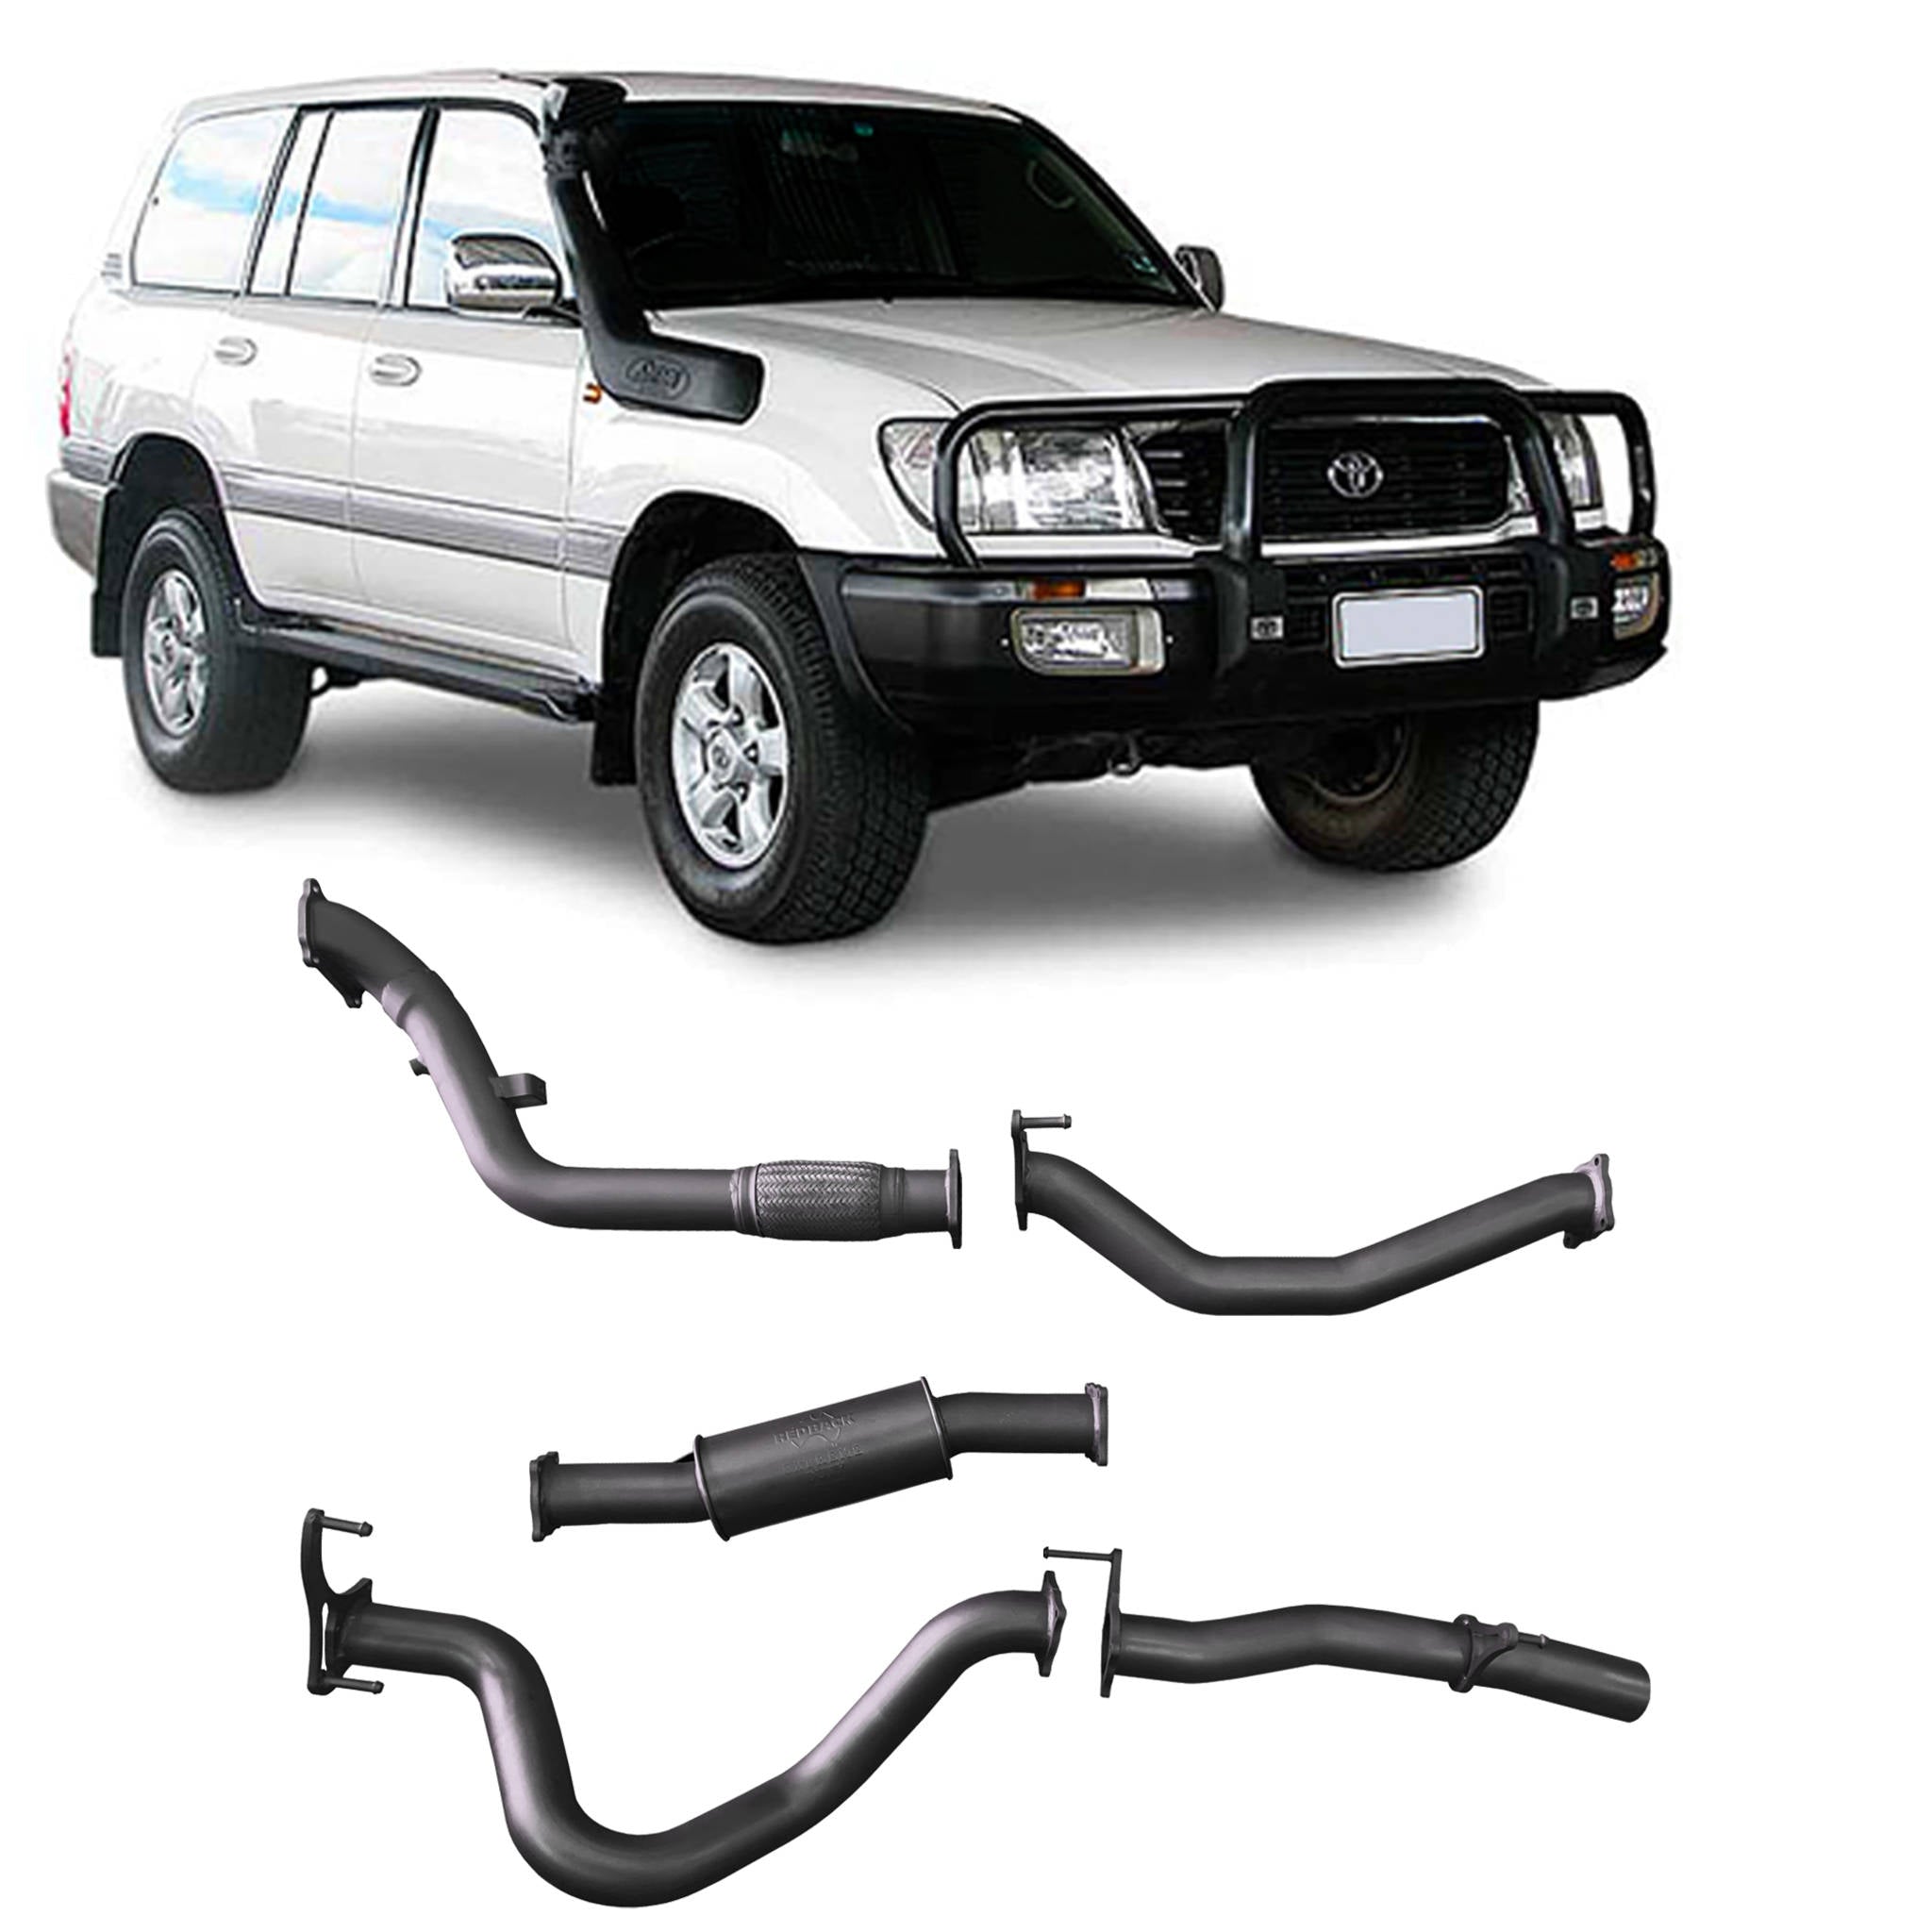 Redback Extreme Duty Exhaust to suit Toyota Landcruiser 100 Series 4.2L (10/2000 - 10/2007)